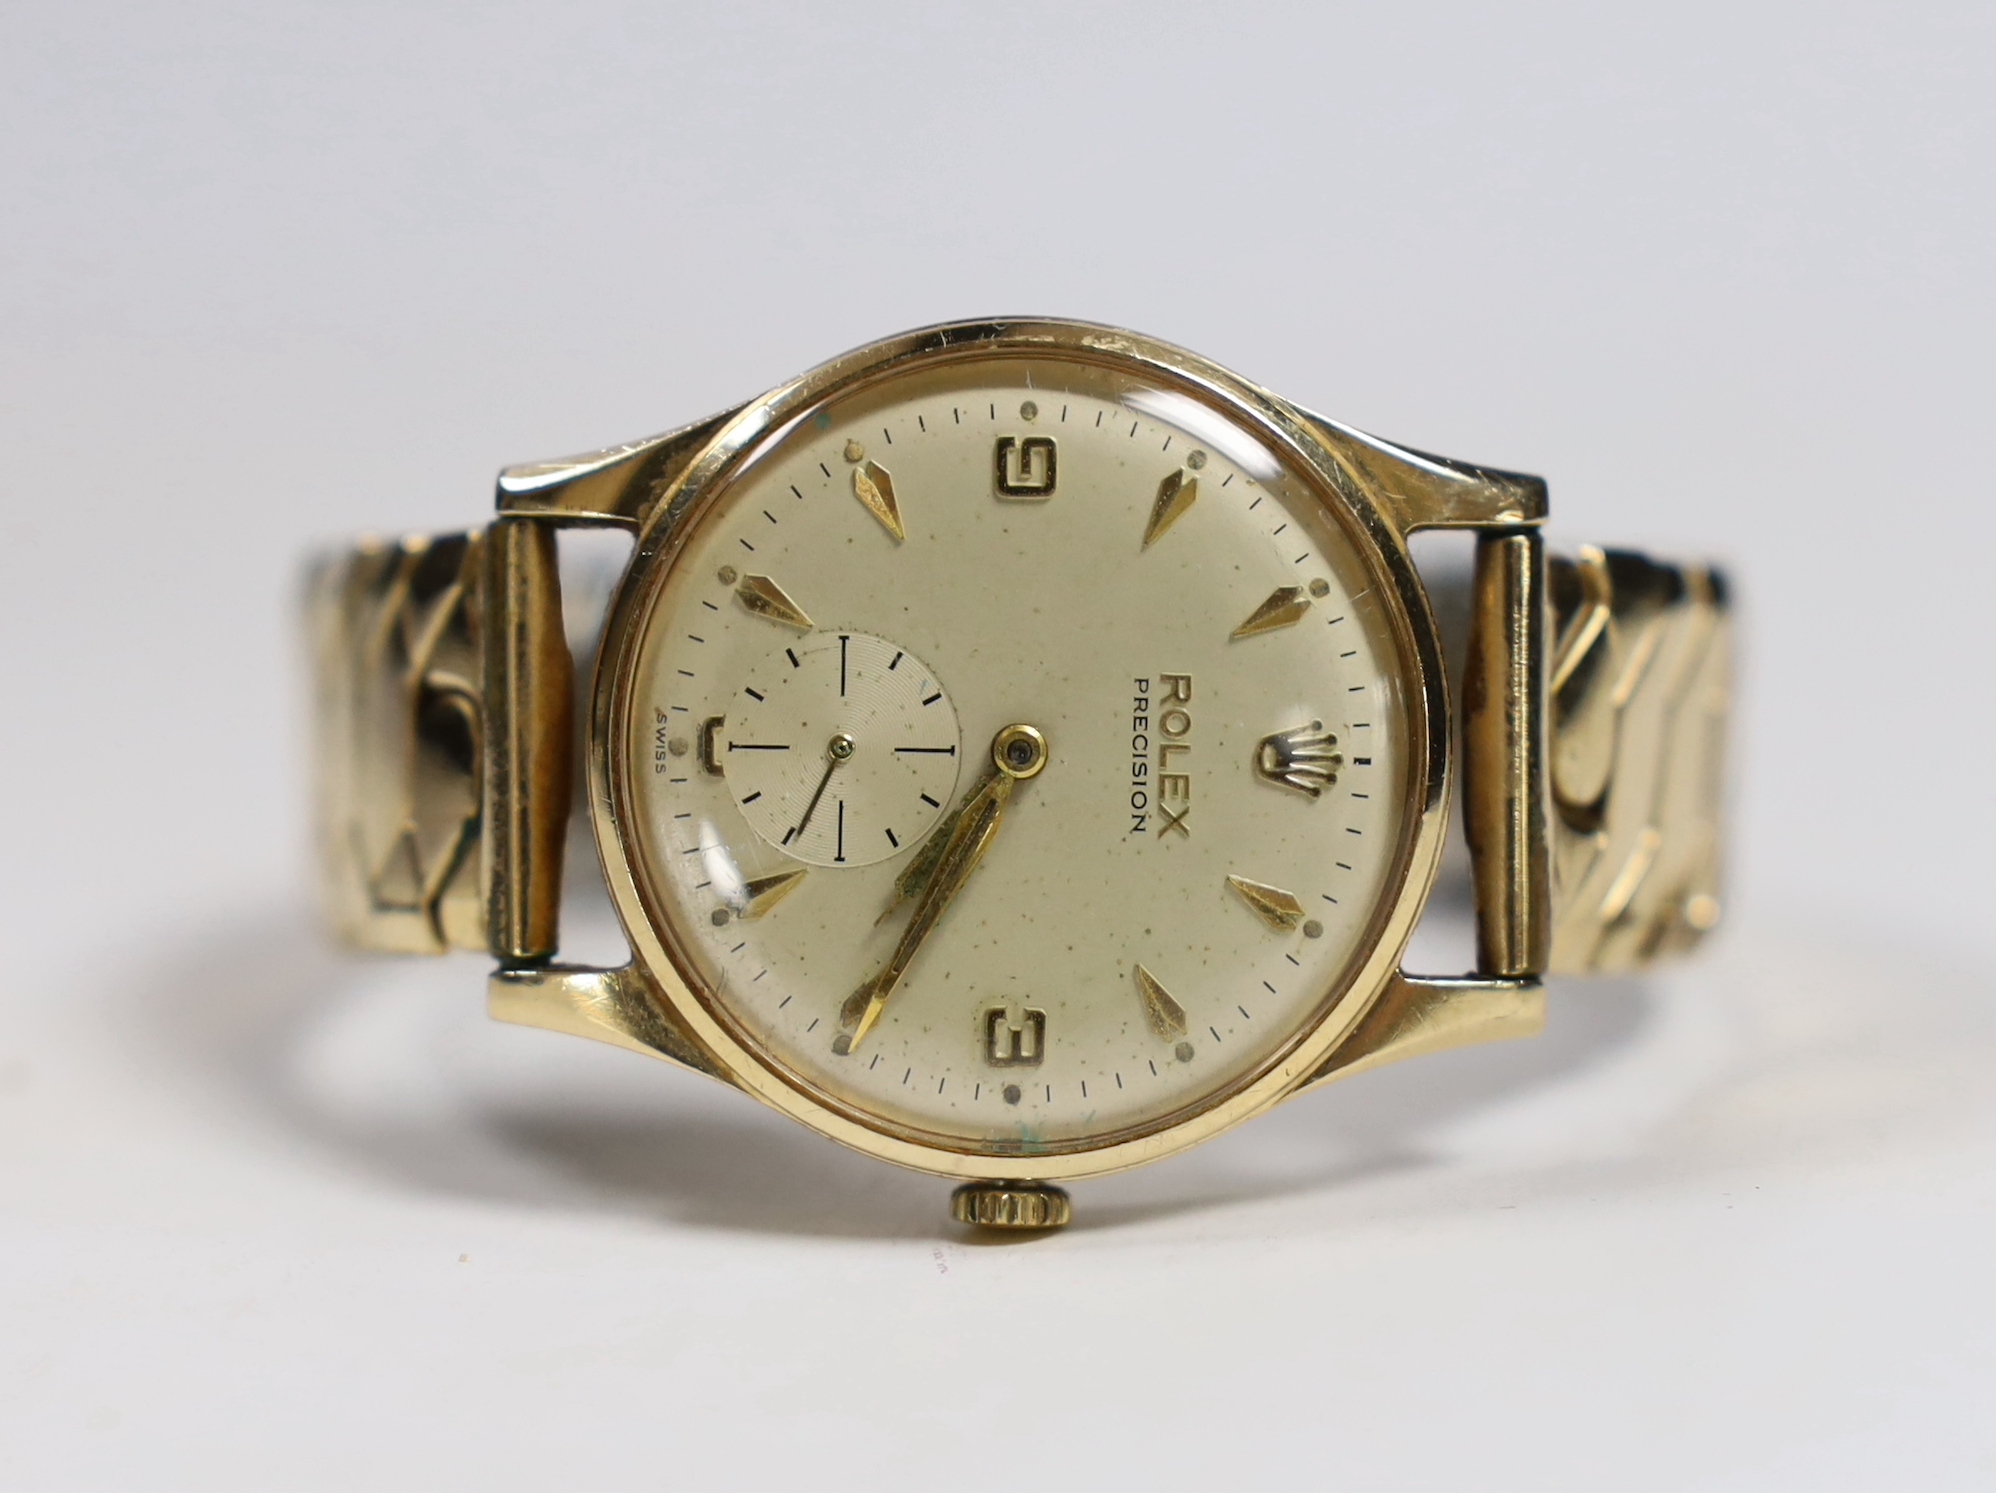 A gentleman's 1960's 9ct gold Rolex Precision manual wind wrist watch, with case back inscription, on associated flexible strap, case diameter 32mm.